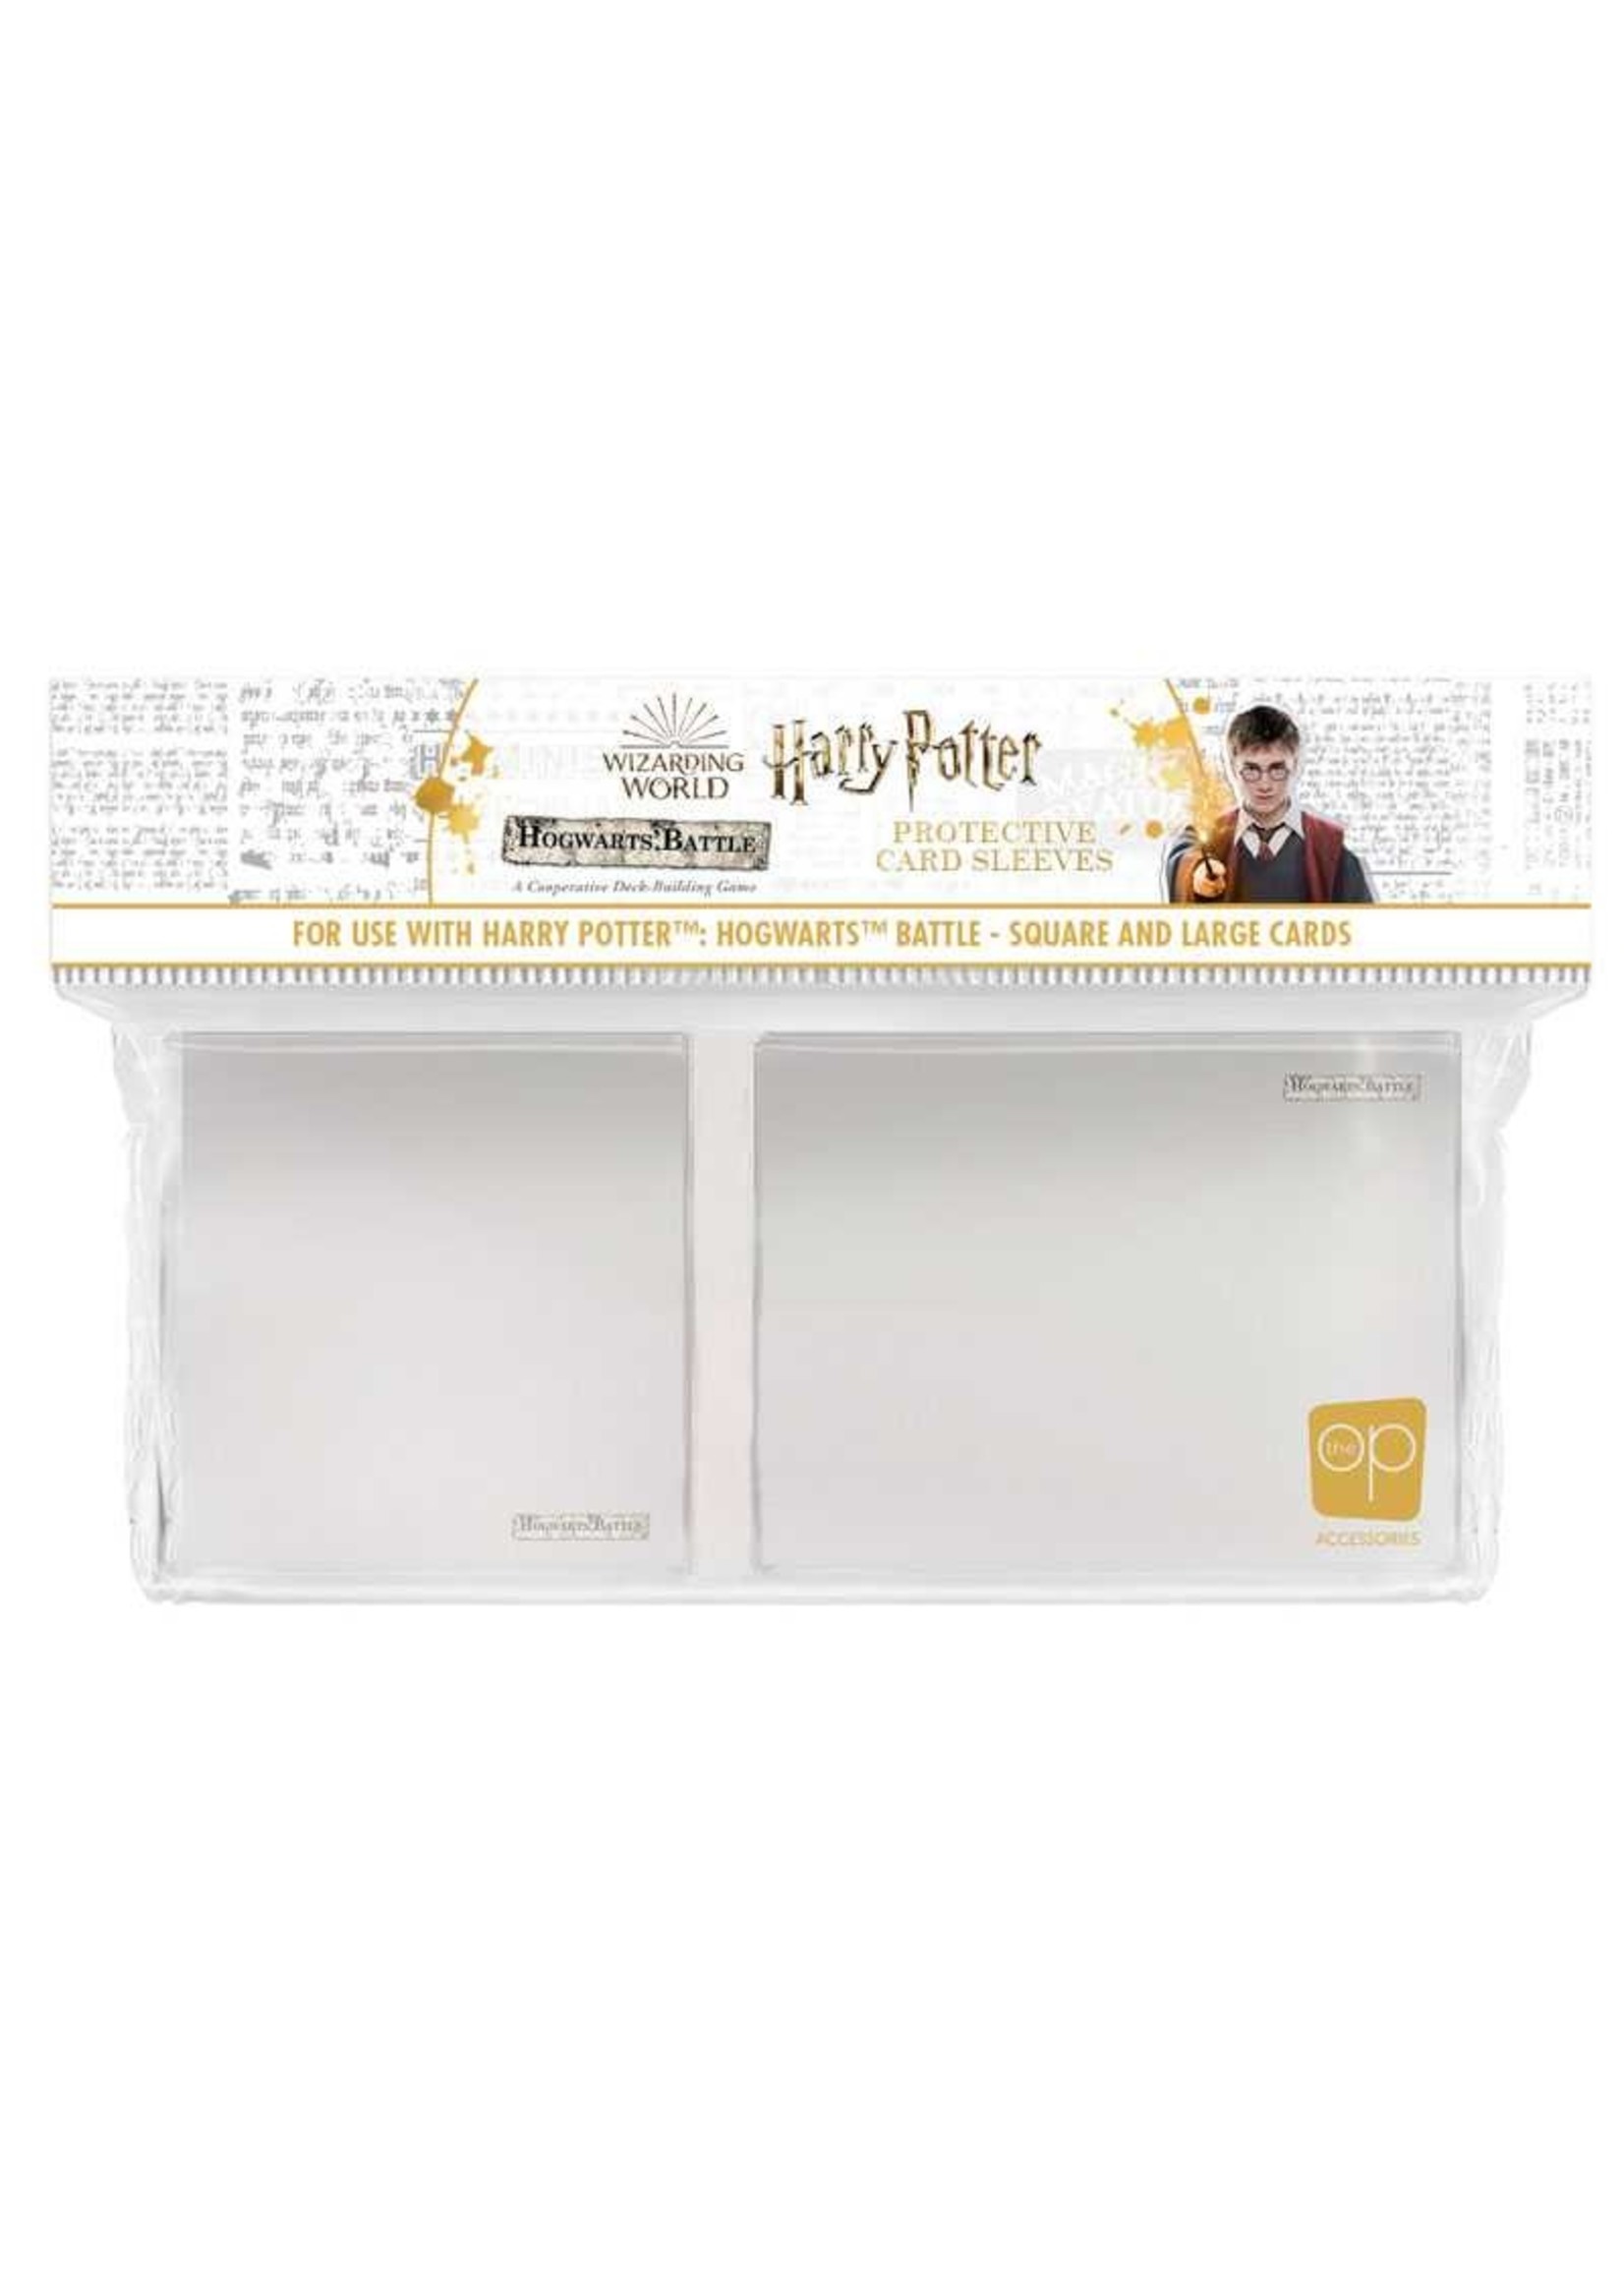 The Op Harry Potter Hogwarts Battle Square and Large Sleeves